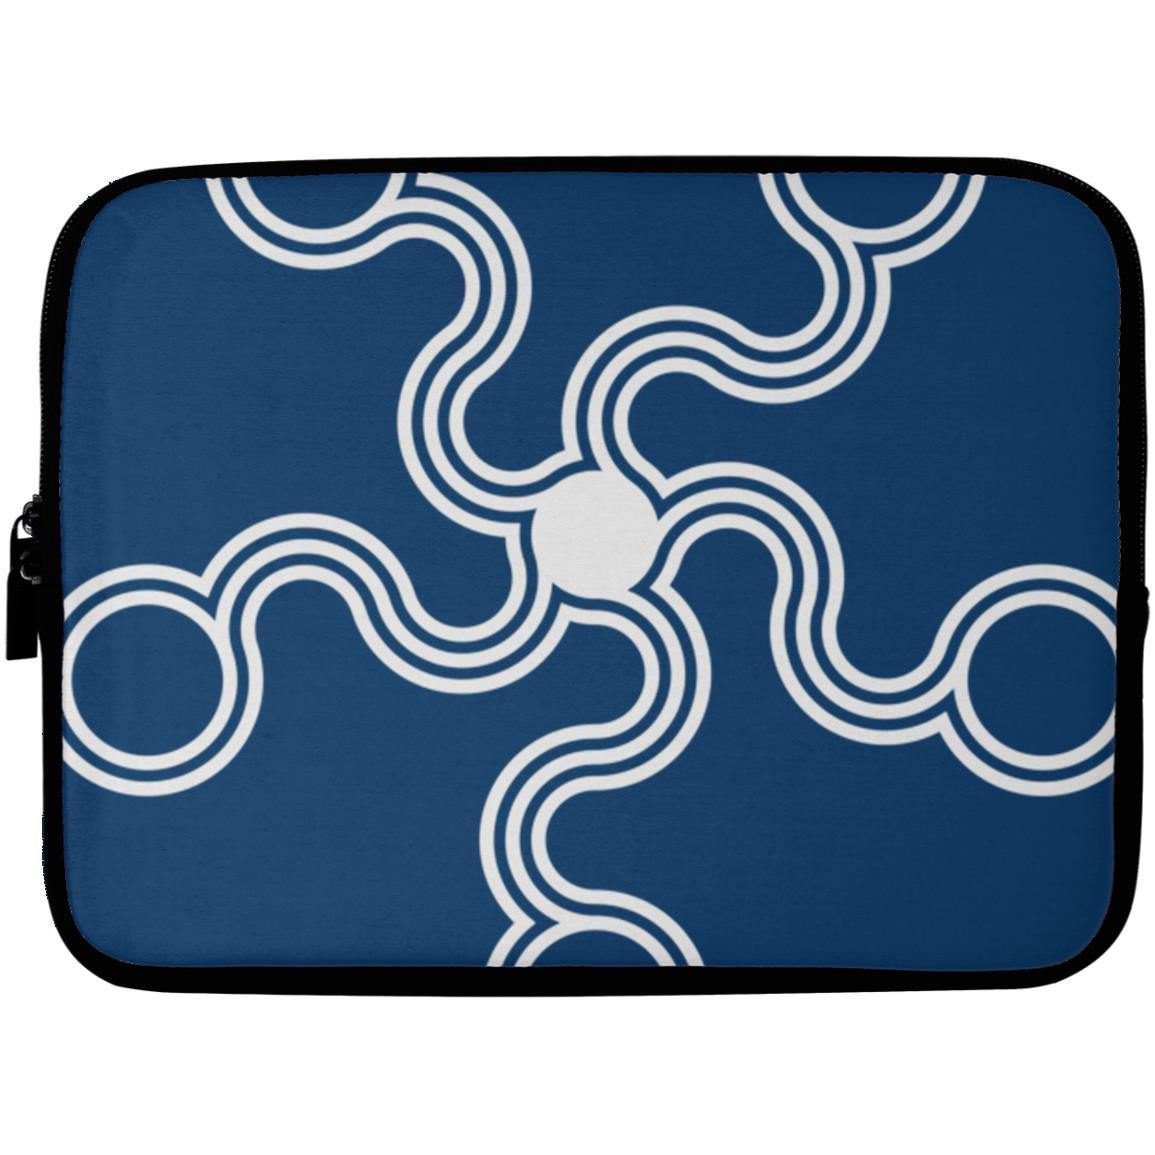 Crop Circle Laptop Sleeve - Willoughby - Shapes of Wisdom